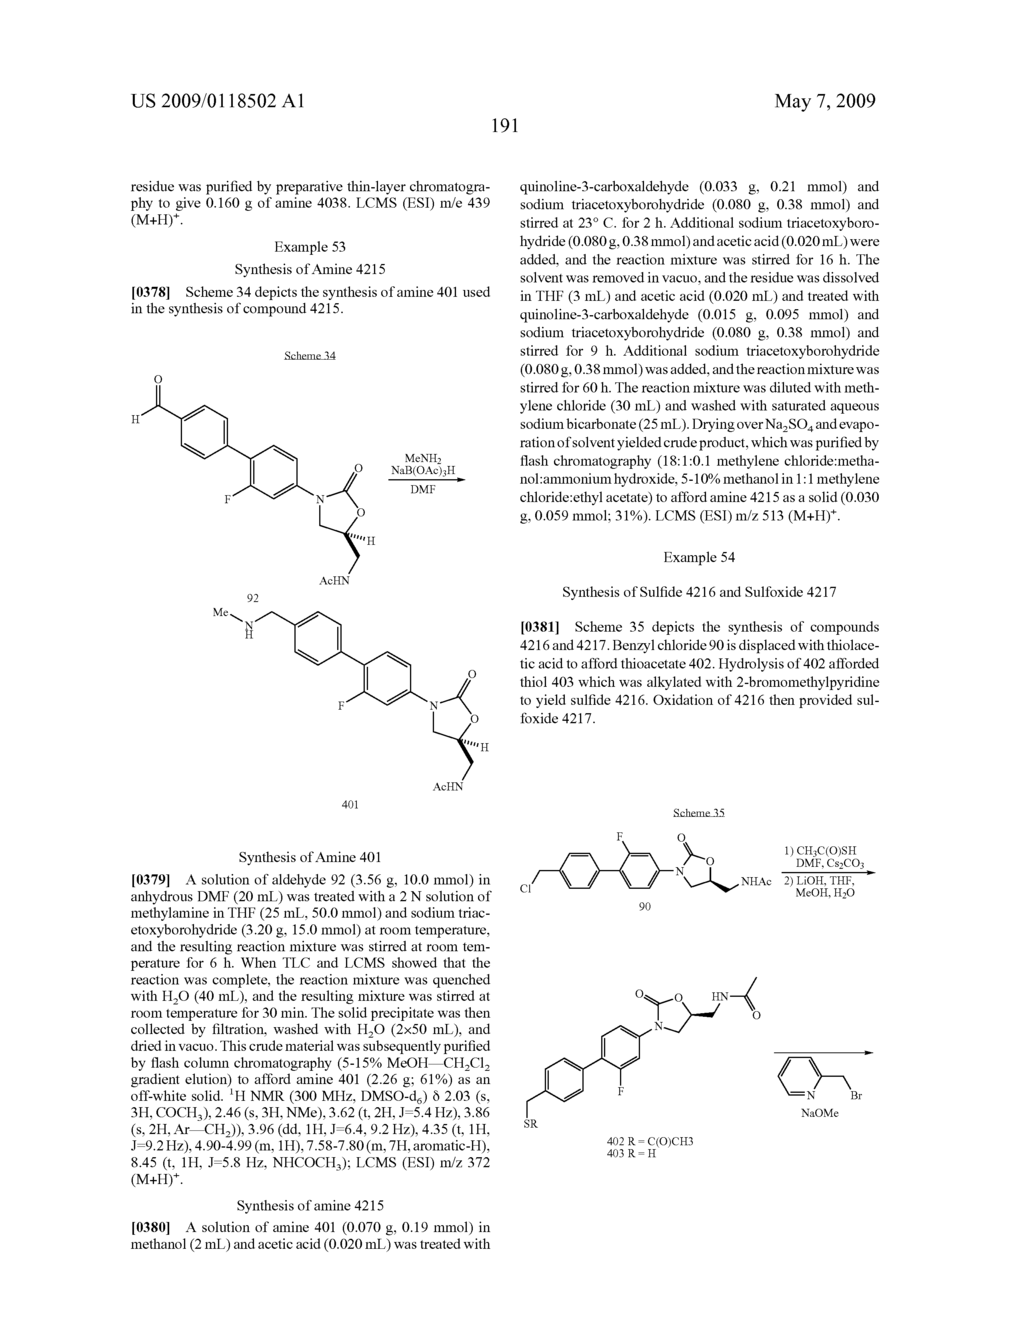 BIARYL HETEROCYCLIC COMPOUNDS AND METHODS OF MAKING AND USING THE SAME - diagram, schematic, and image 192